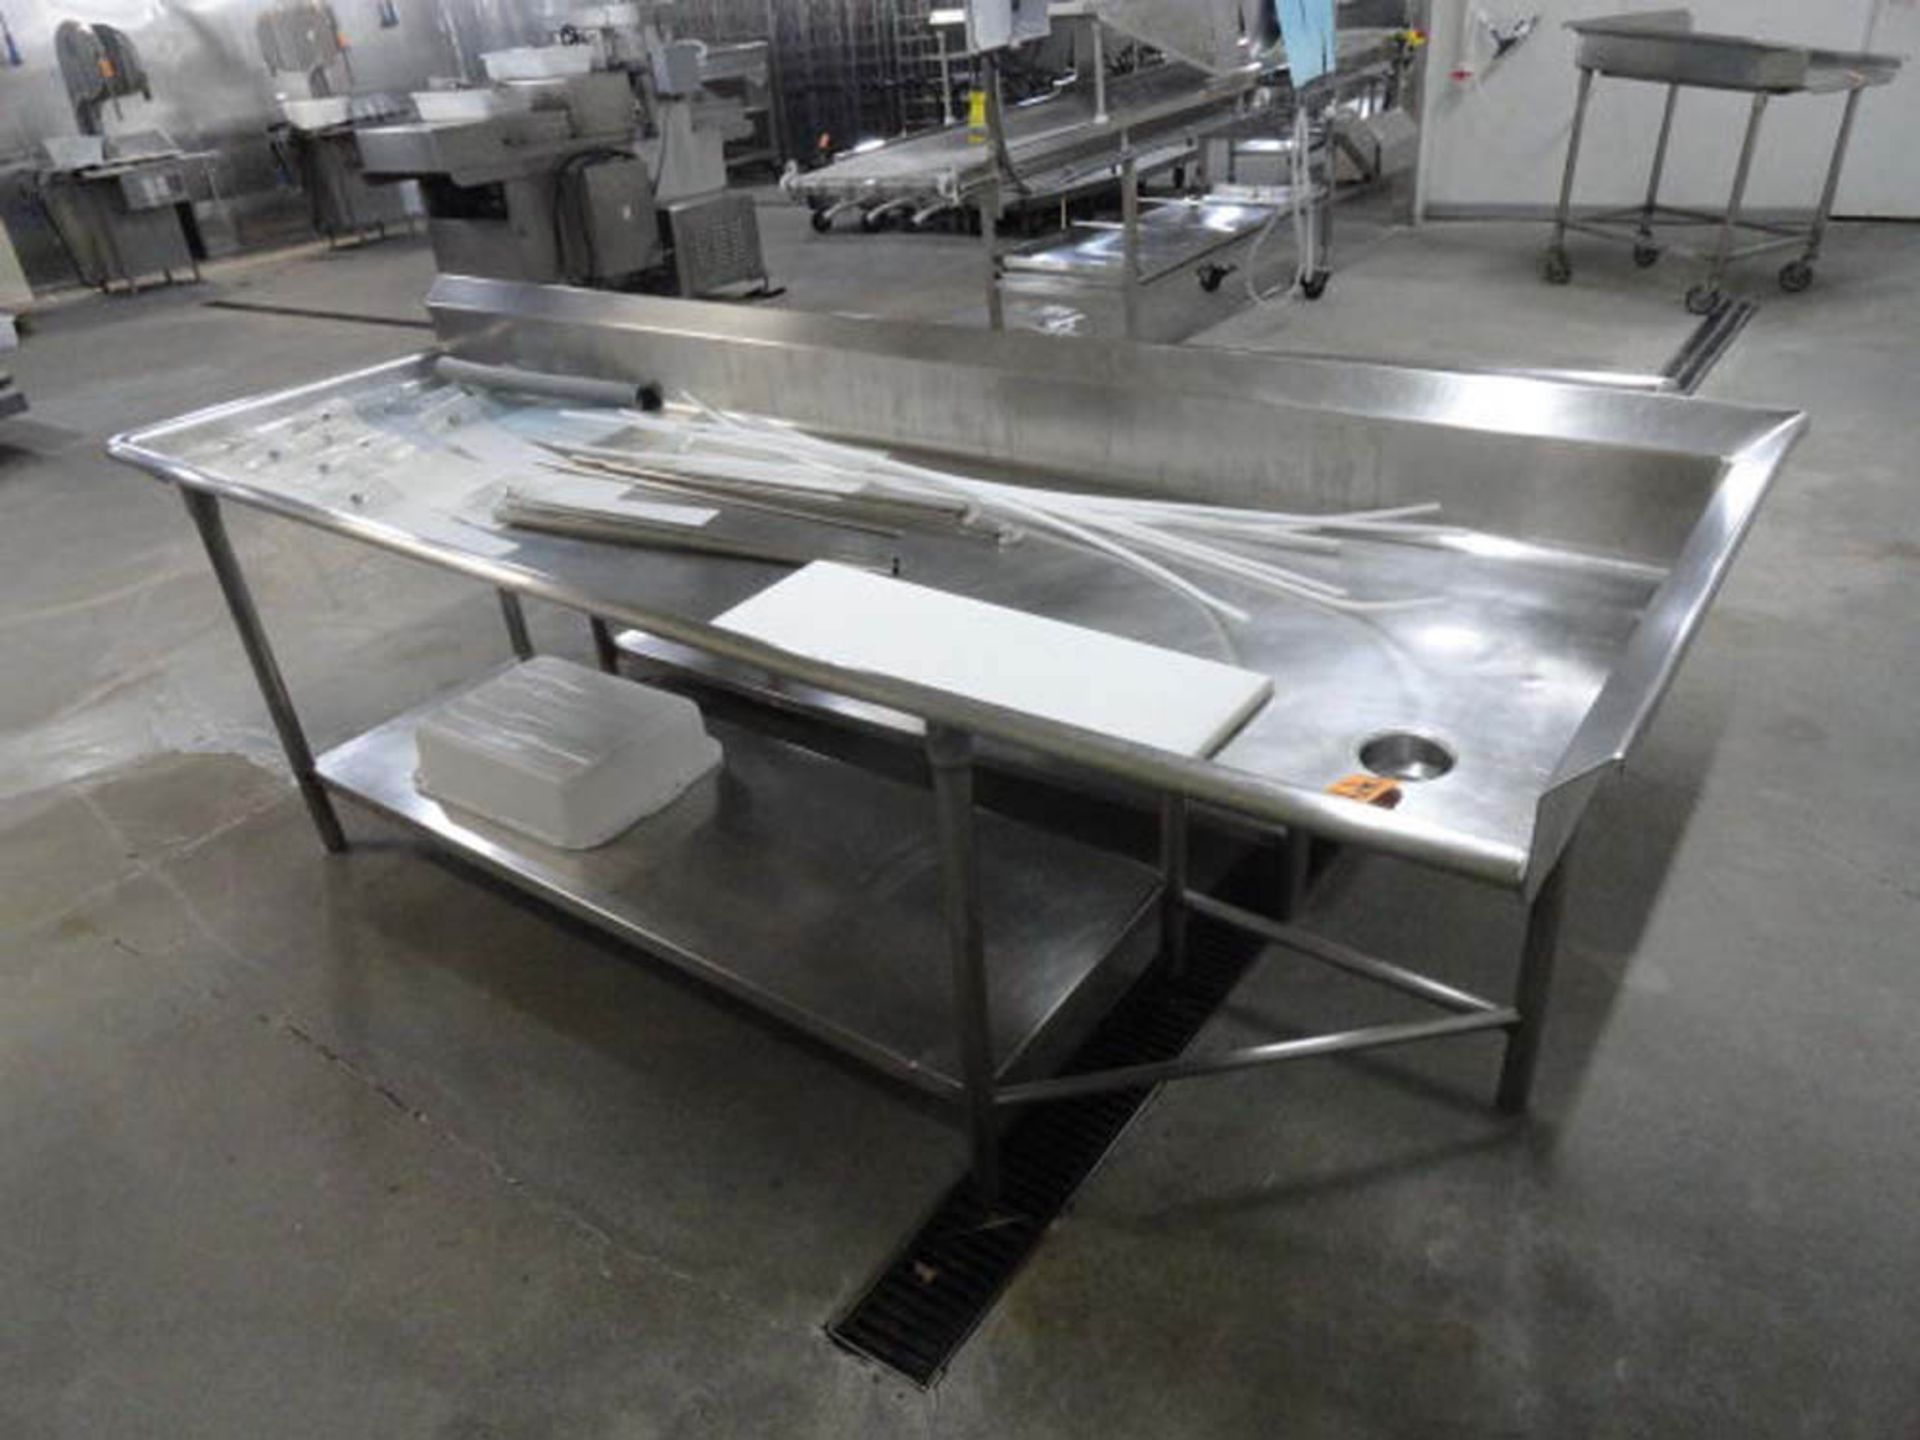 STAINLESS STEEL TABLE, 8' X 30" WITH DRAIN - Image 3 of 4